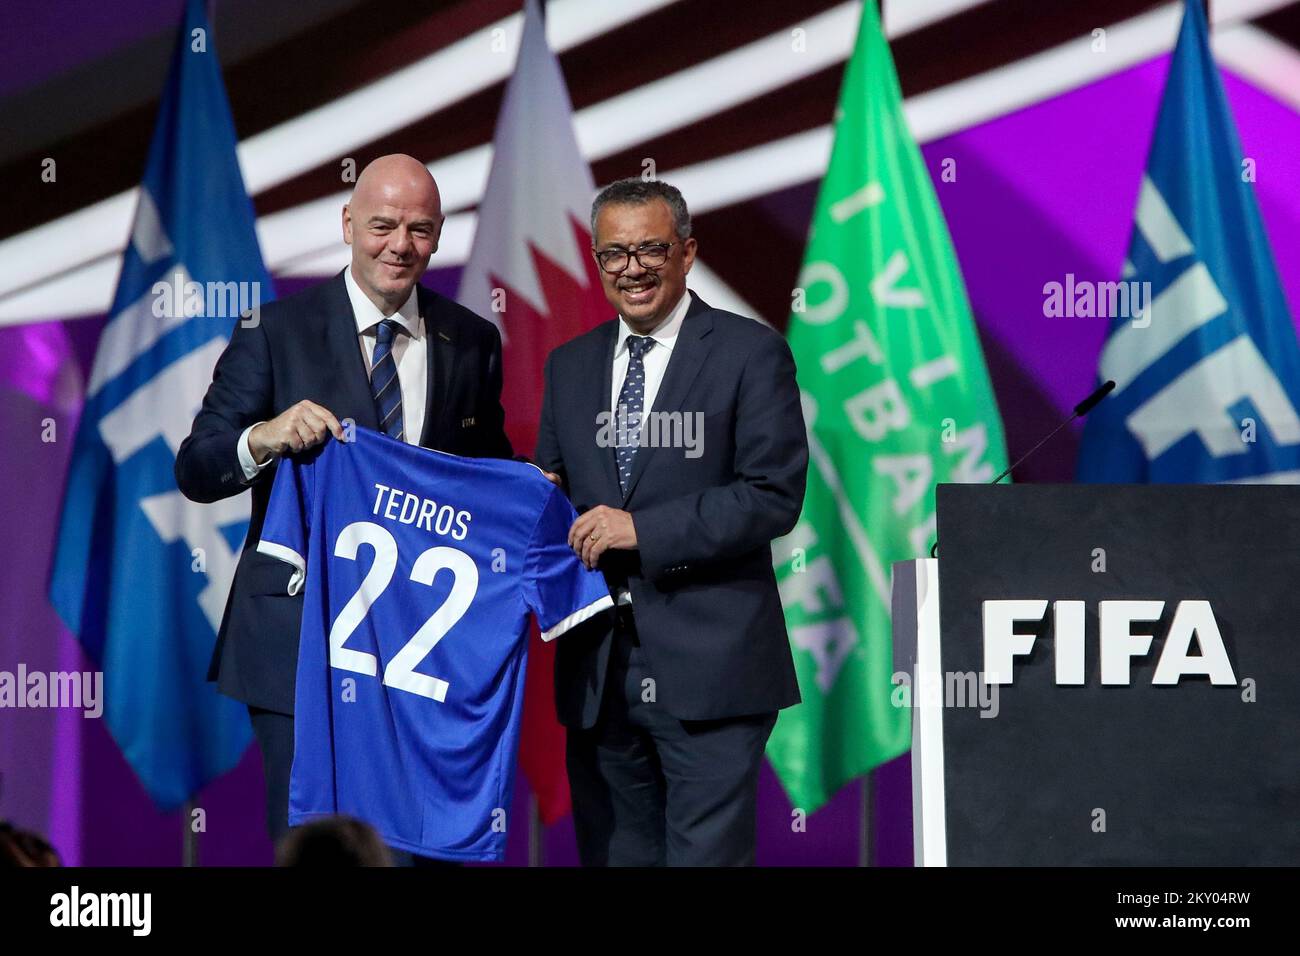 Director-General of the World Health Organization Tedros Adhanom Ghebreyesus poses for a photo as he is presented with a shirt by FIFA President Gianni Infantino during the 72nd FIFA Congress at the Doha Exhibition and Convention Center on March 31, 2022 in Doha, Qatar. Photo: Igor Kralj/PIXSELL Stock Photo